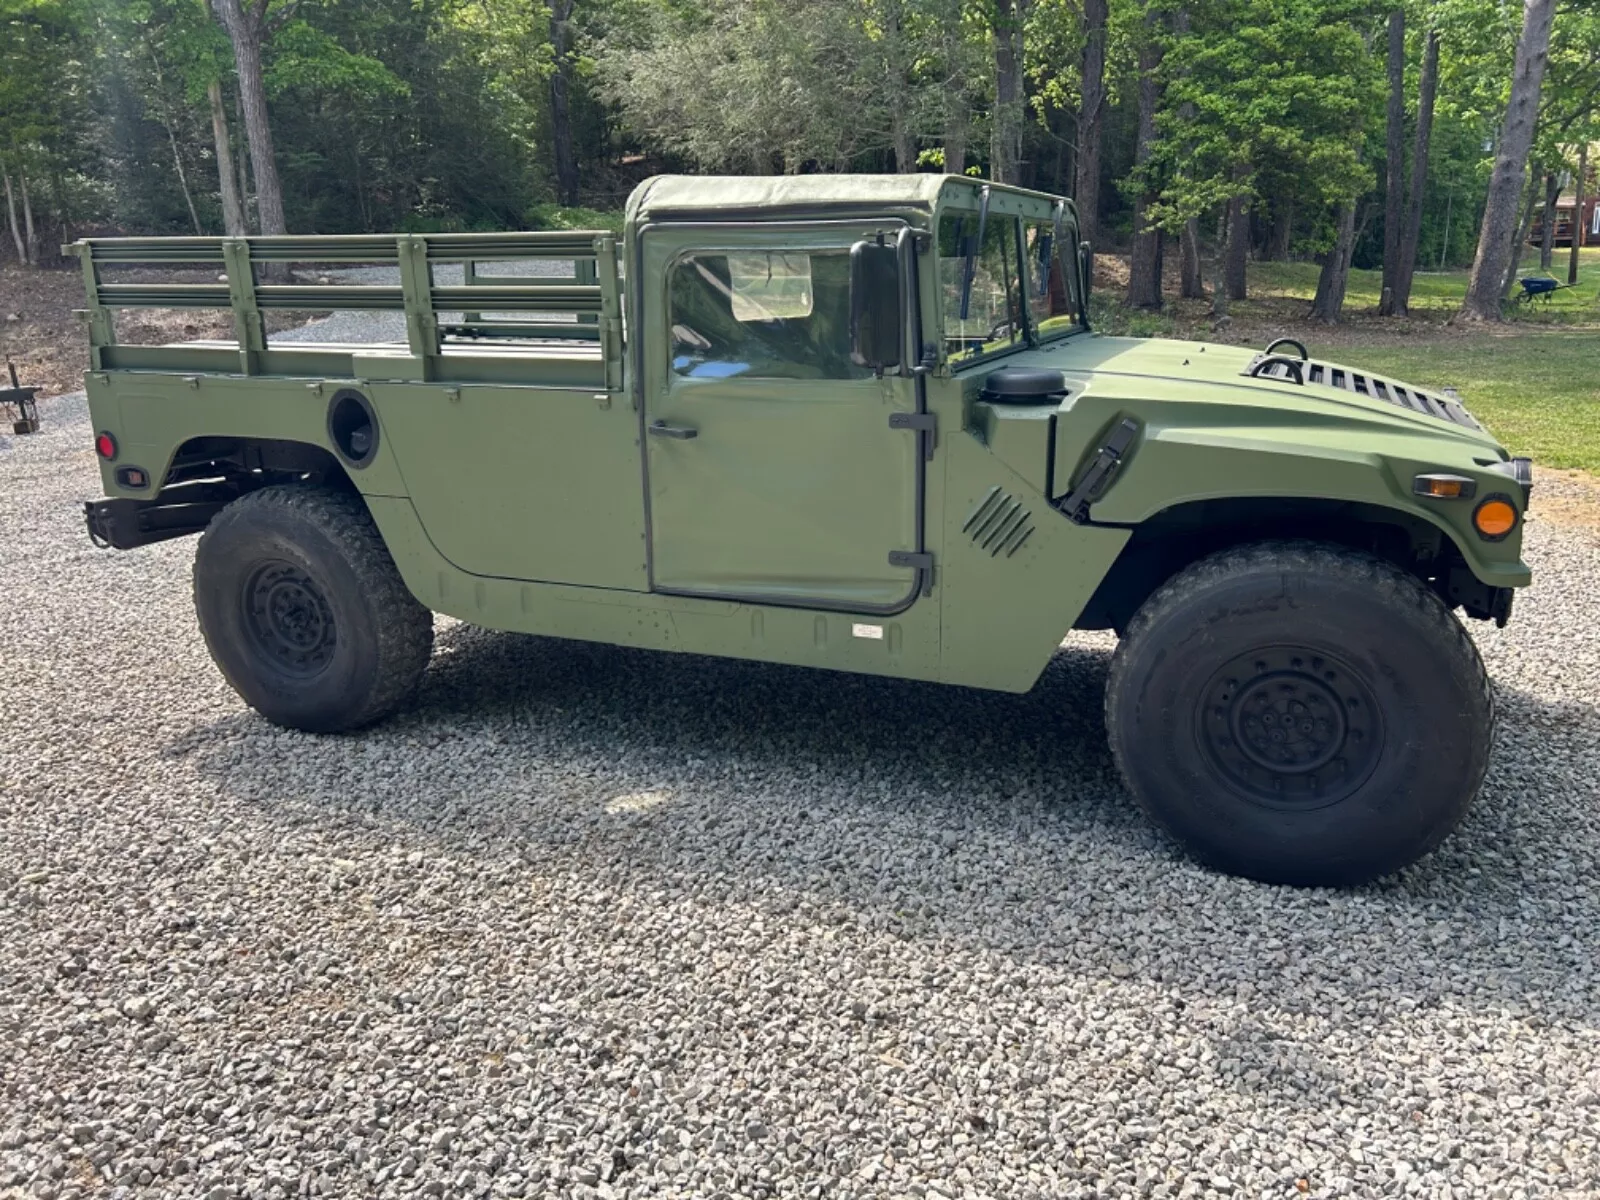 1989 Hmmwv 1097 A1 Hummer H1 Military Humvee for sale